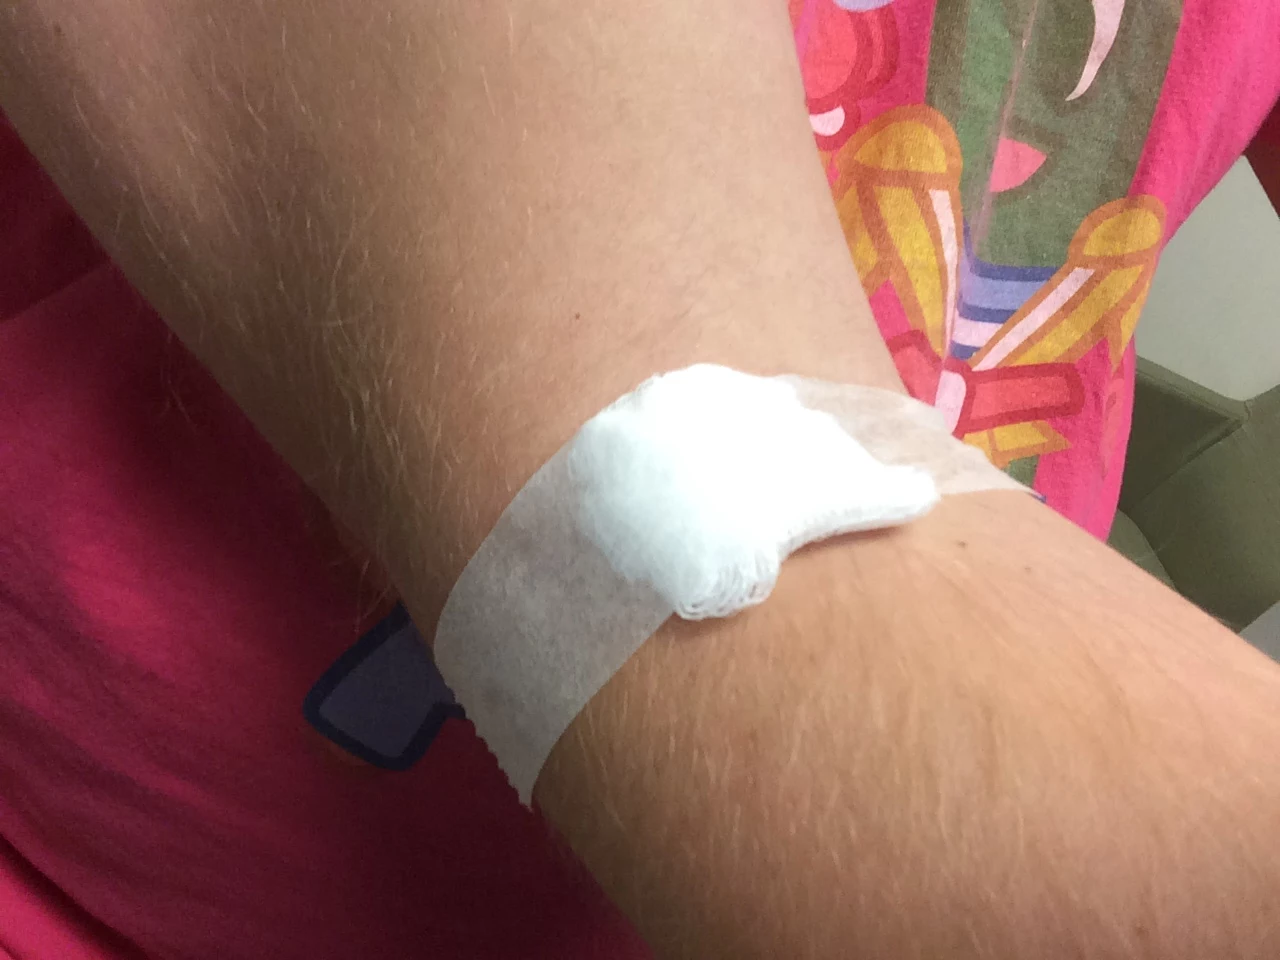 How long to keep bandage on after blood draw